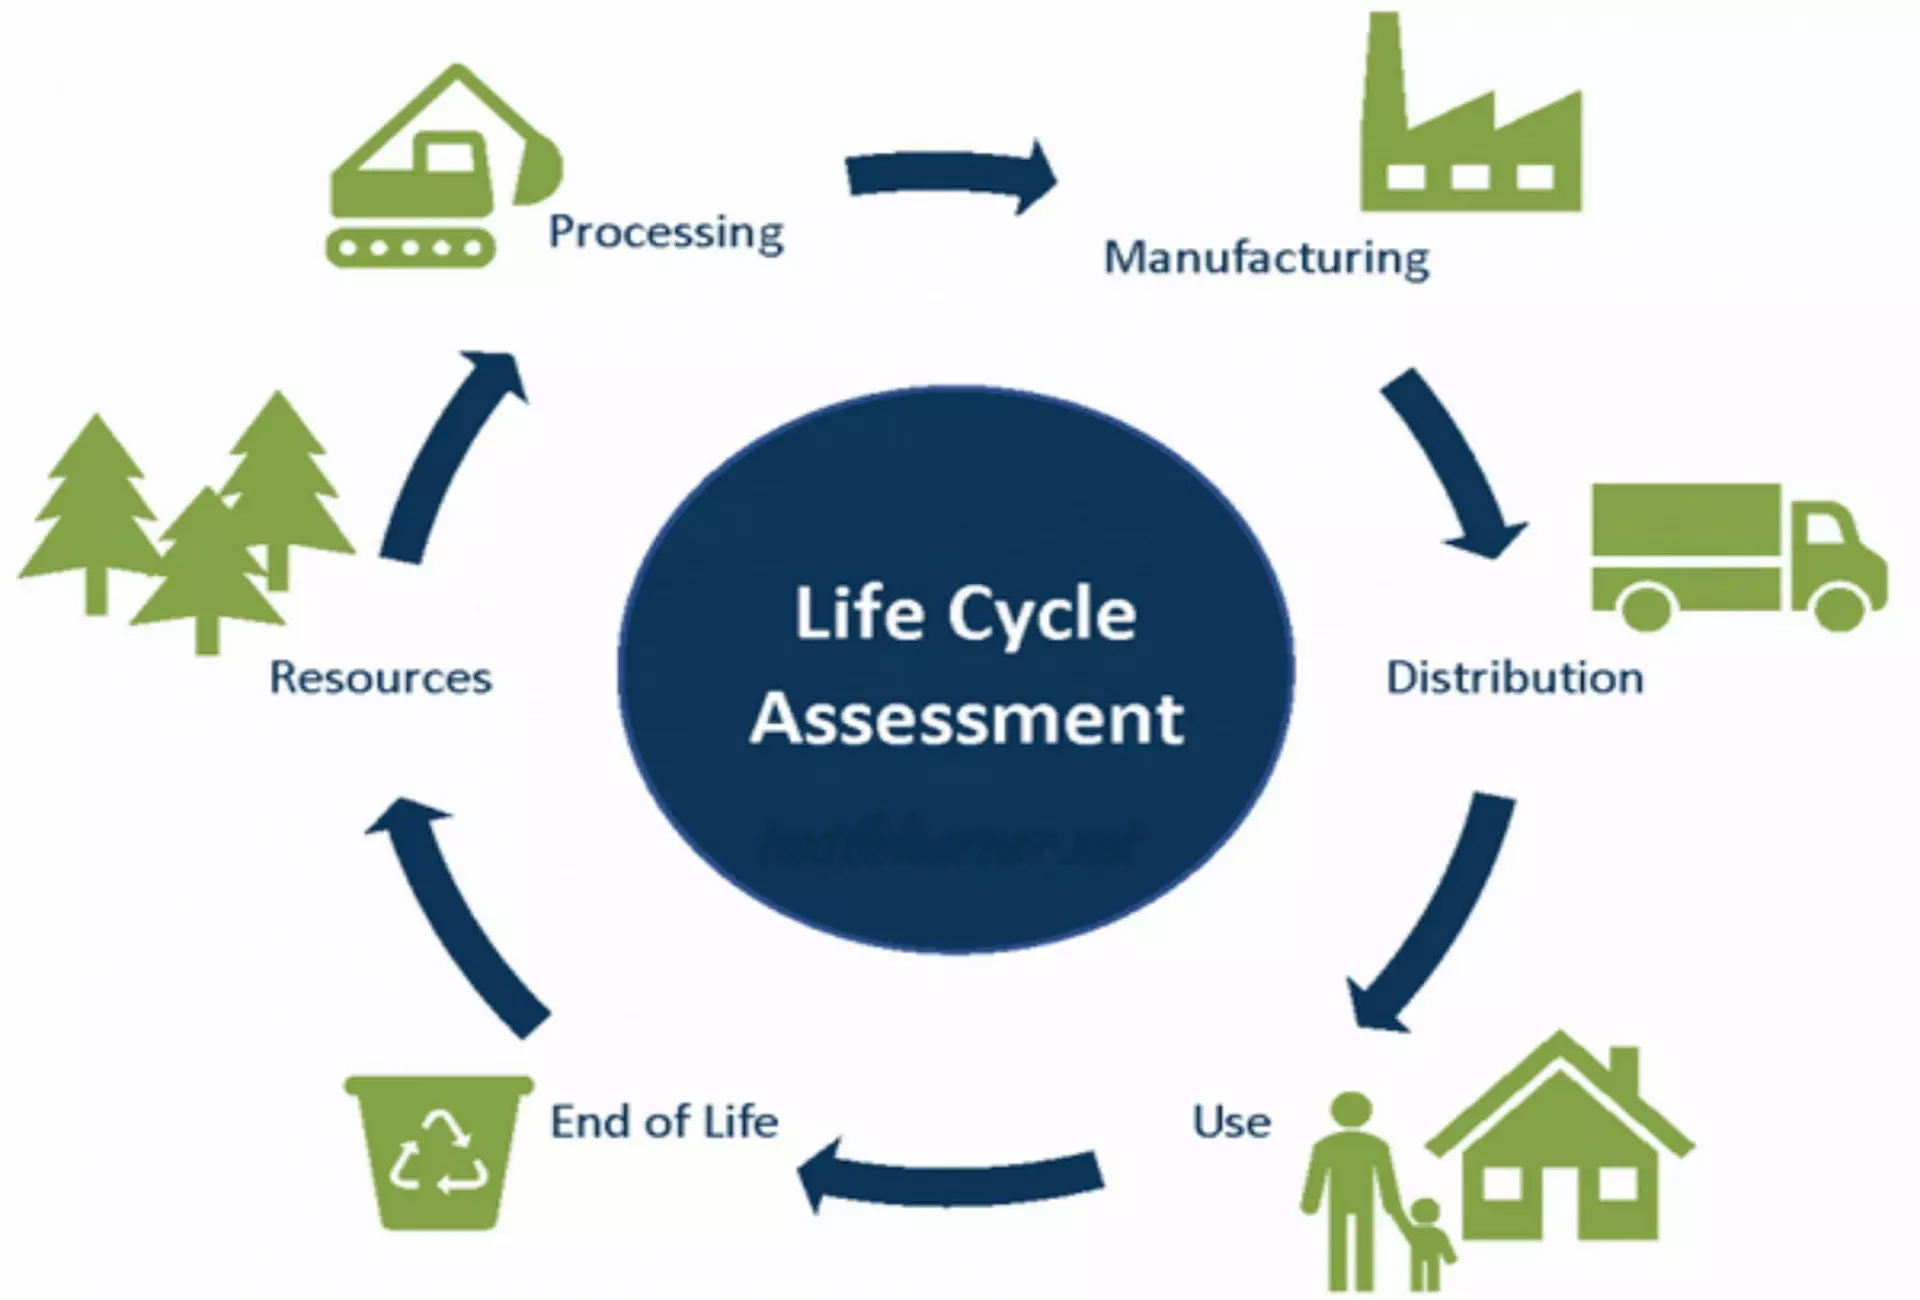 The Life Cycle Assessment